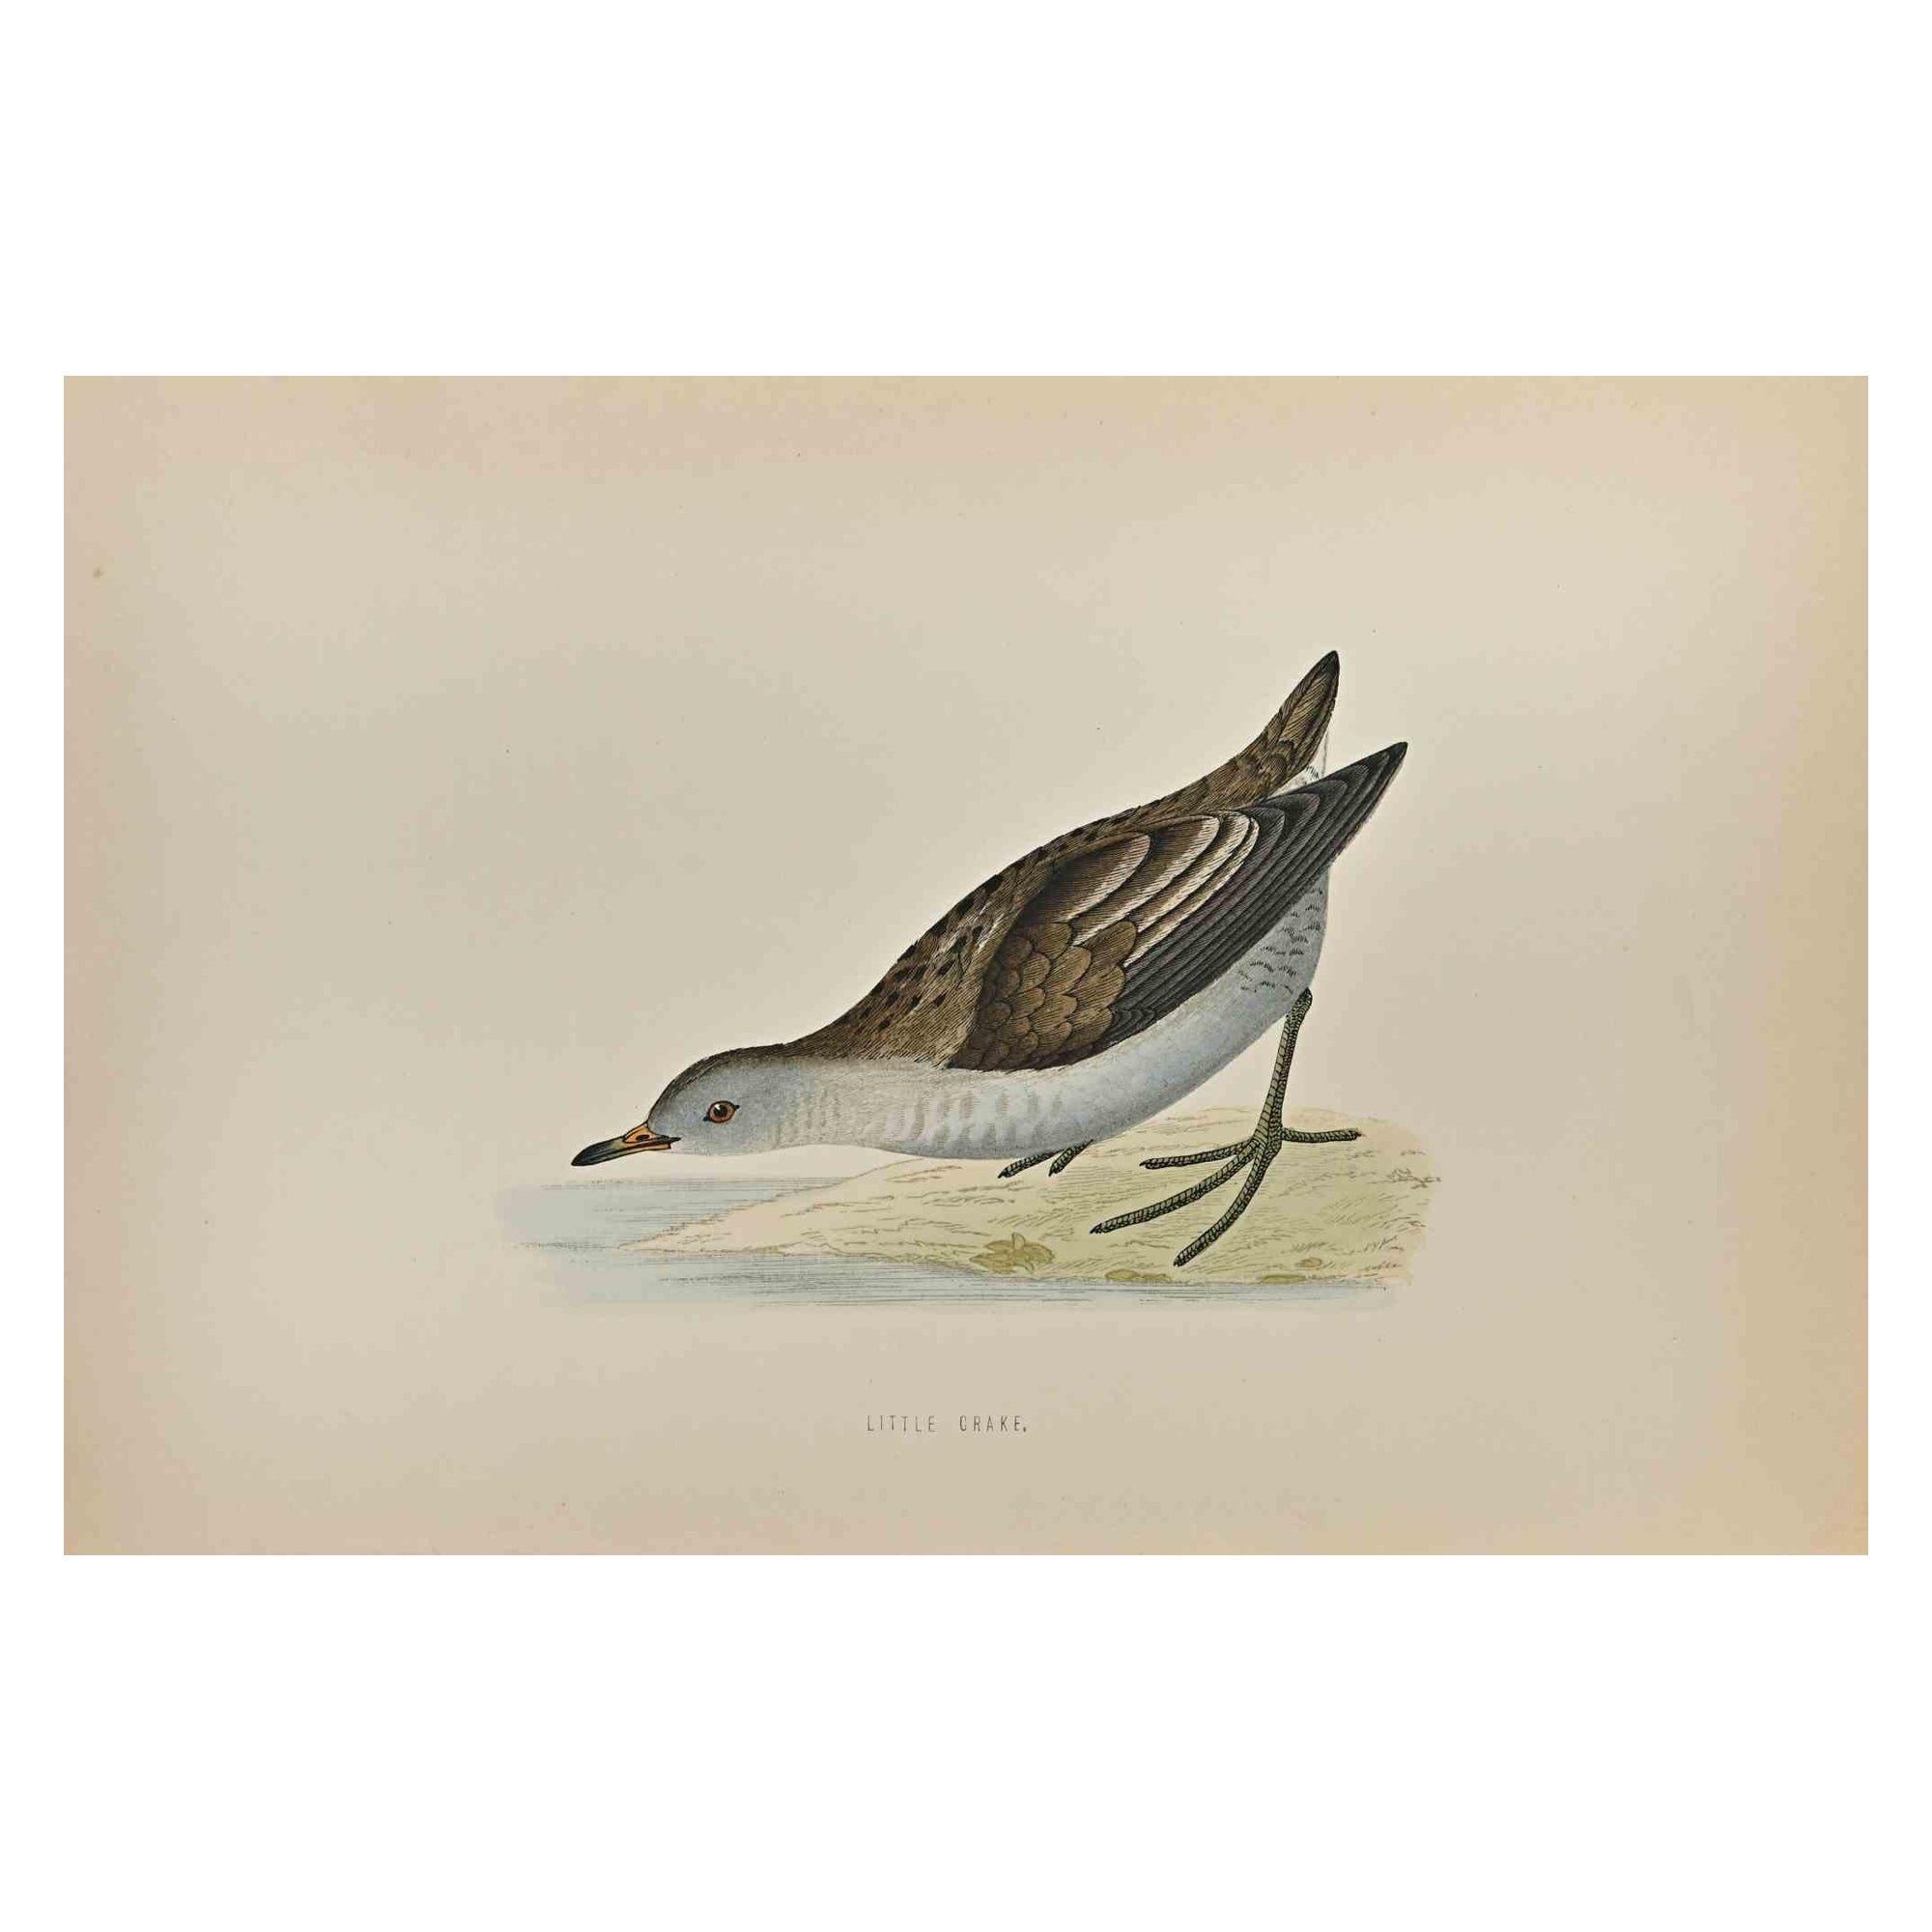 Little Crake  is a modern artwork realized in 1870 by the British artist Alexander Francis Lydon (1836-1917) . 

Woodcut print, hand colored, published by London, Bell & Sons, 1870.  Name of the bird printed in plate. This work is part of a print